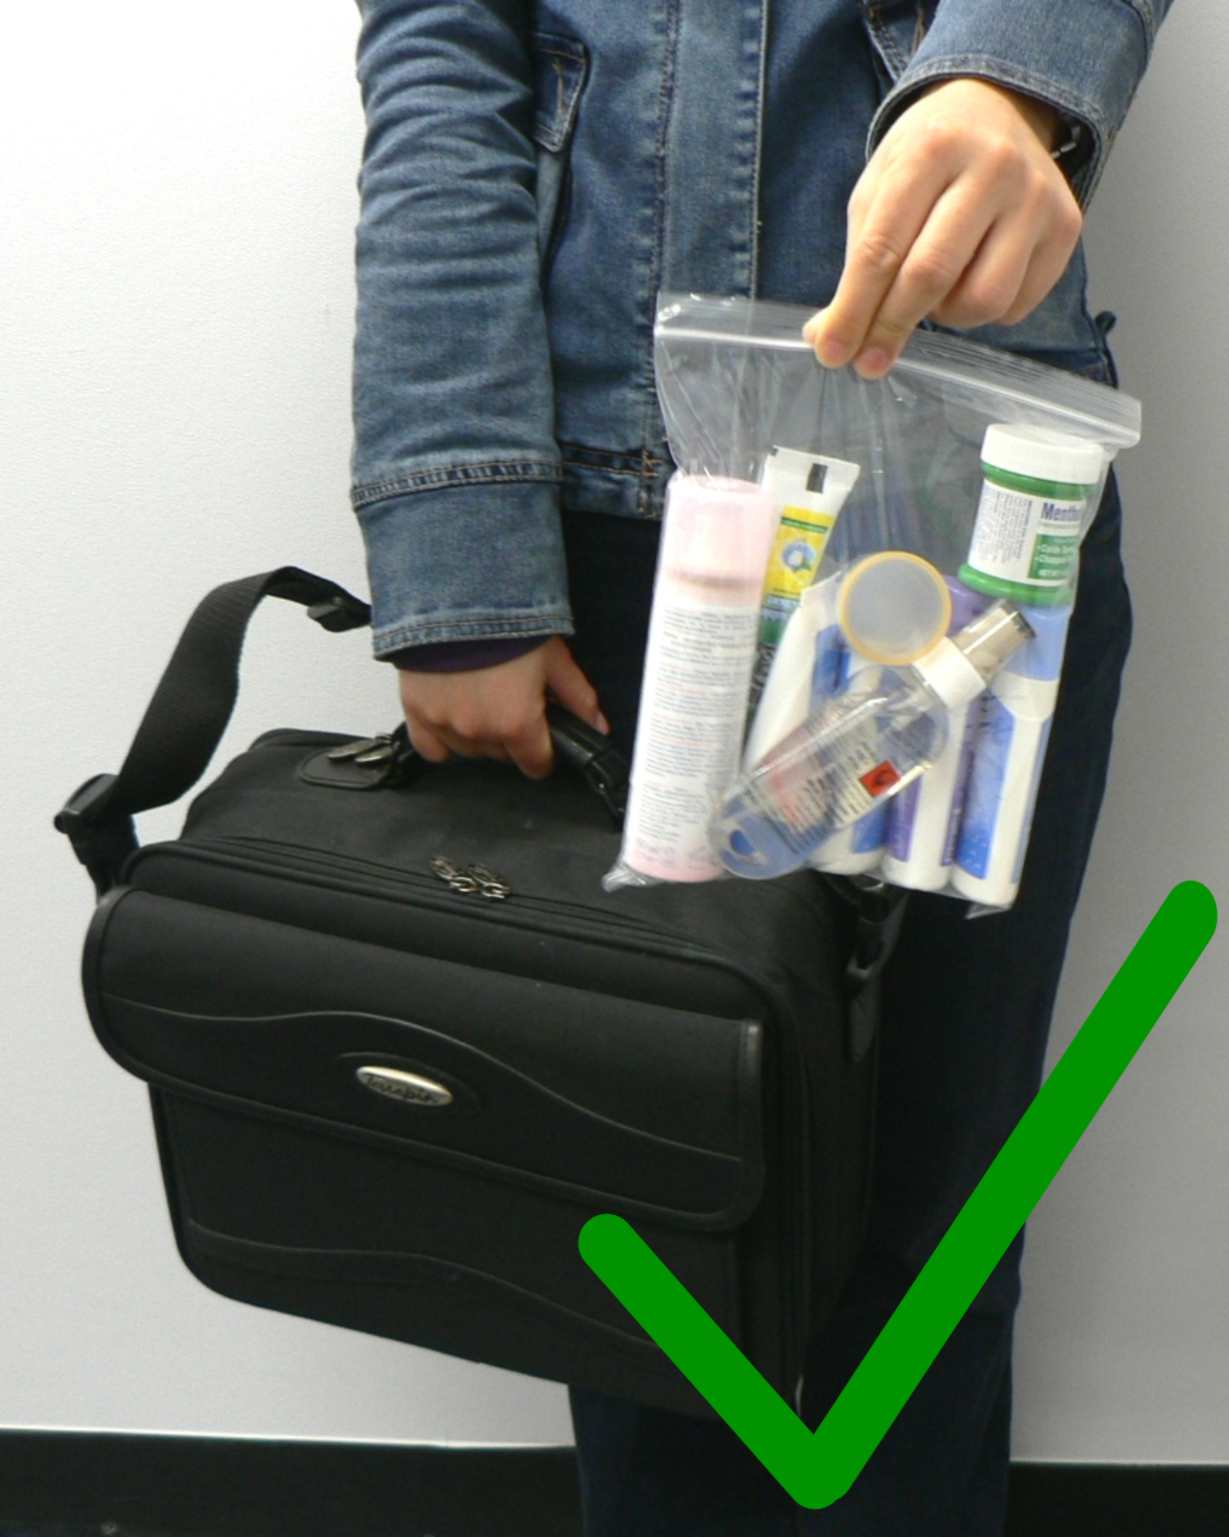 The plastic bag has to be presented separately from other cabin baggage for visual examination at the screening point.